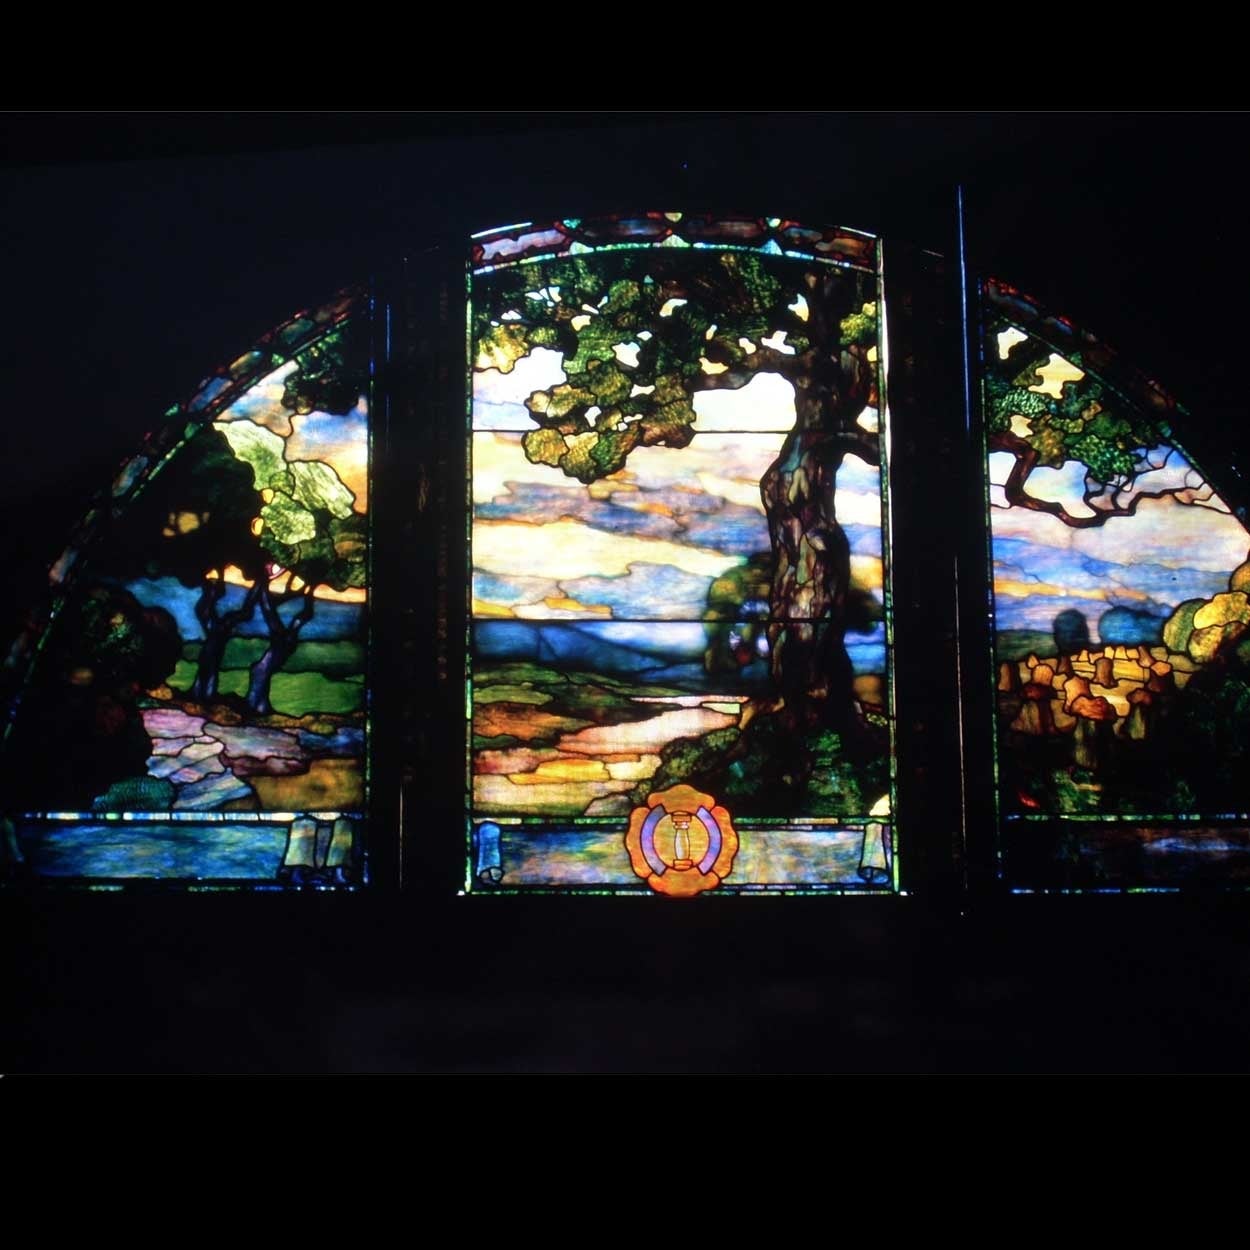 Attributed to Duffner and Kimberly (New York, 1905-11)
An antique, three-part framed arched glass window with leaded, stained and opalescent glass. It features a gnarled, old oak tree with a sunset background representing both knowledge and the end